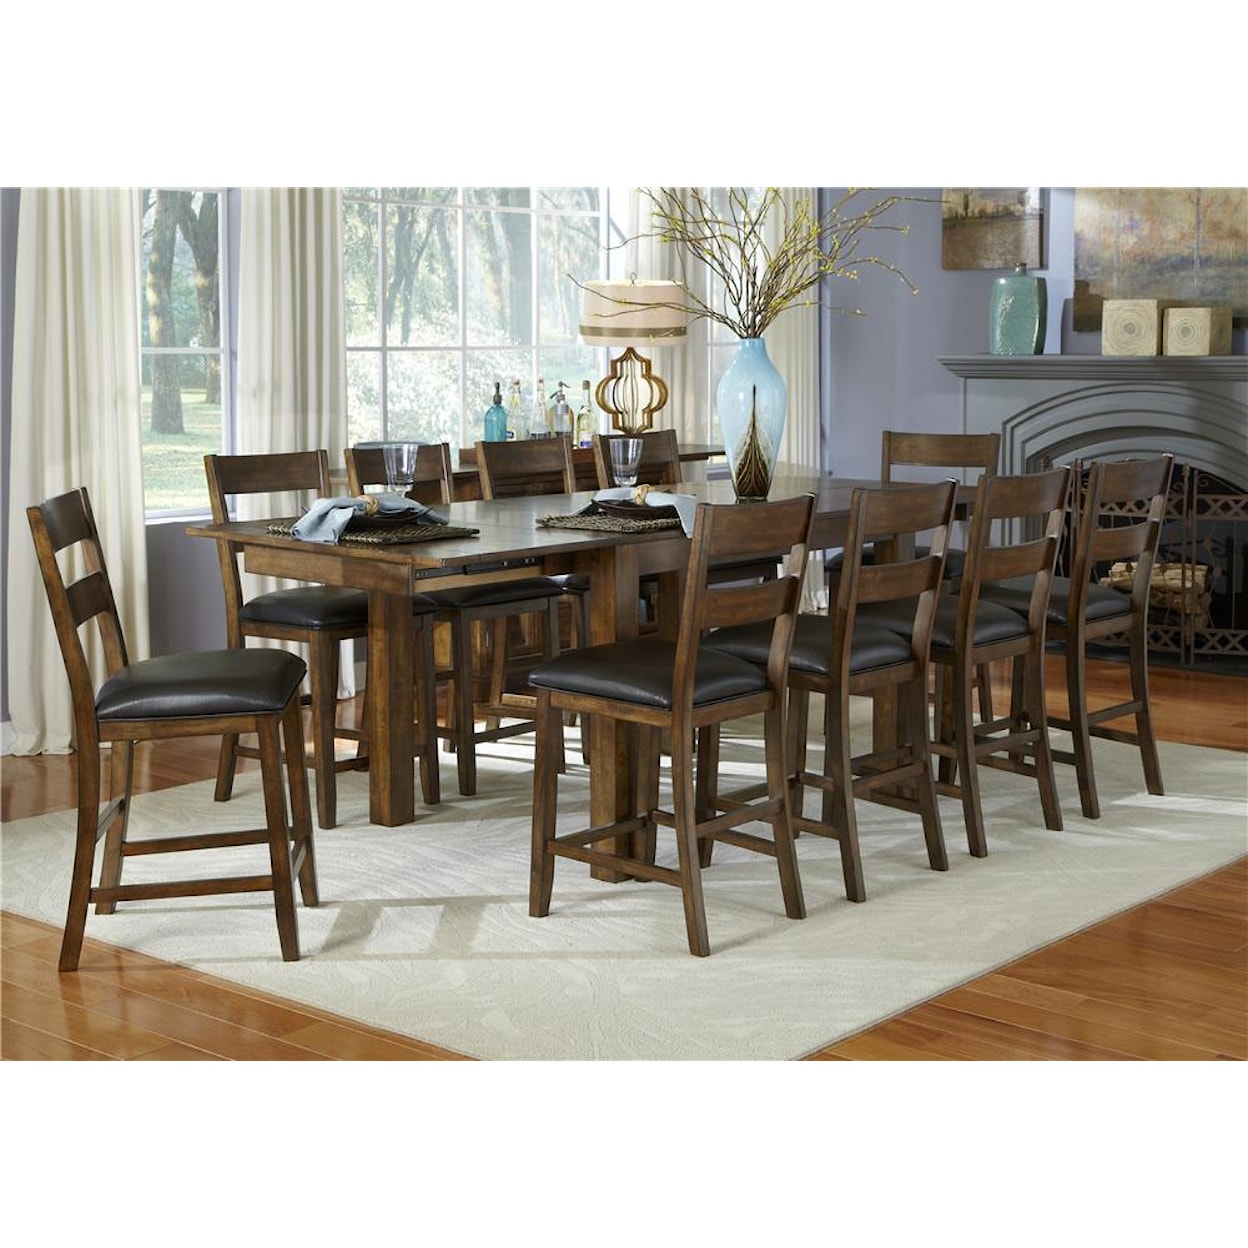 AAmerica Mariposa 11 Piece Gathering Table and Chairs Set